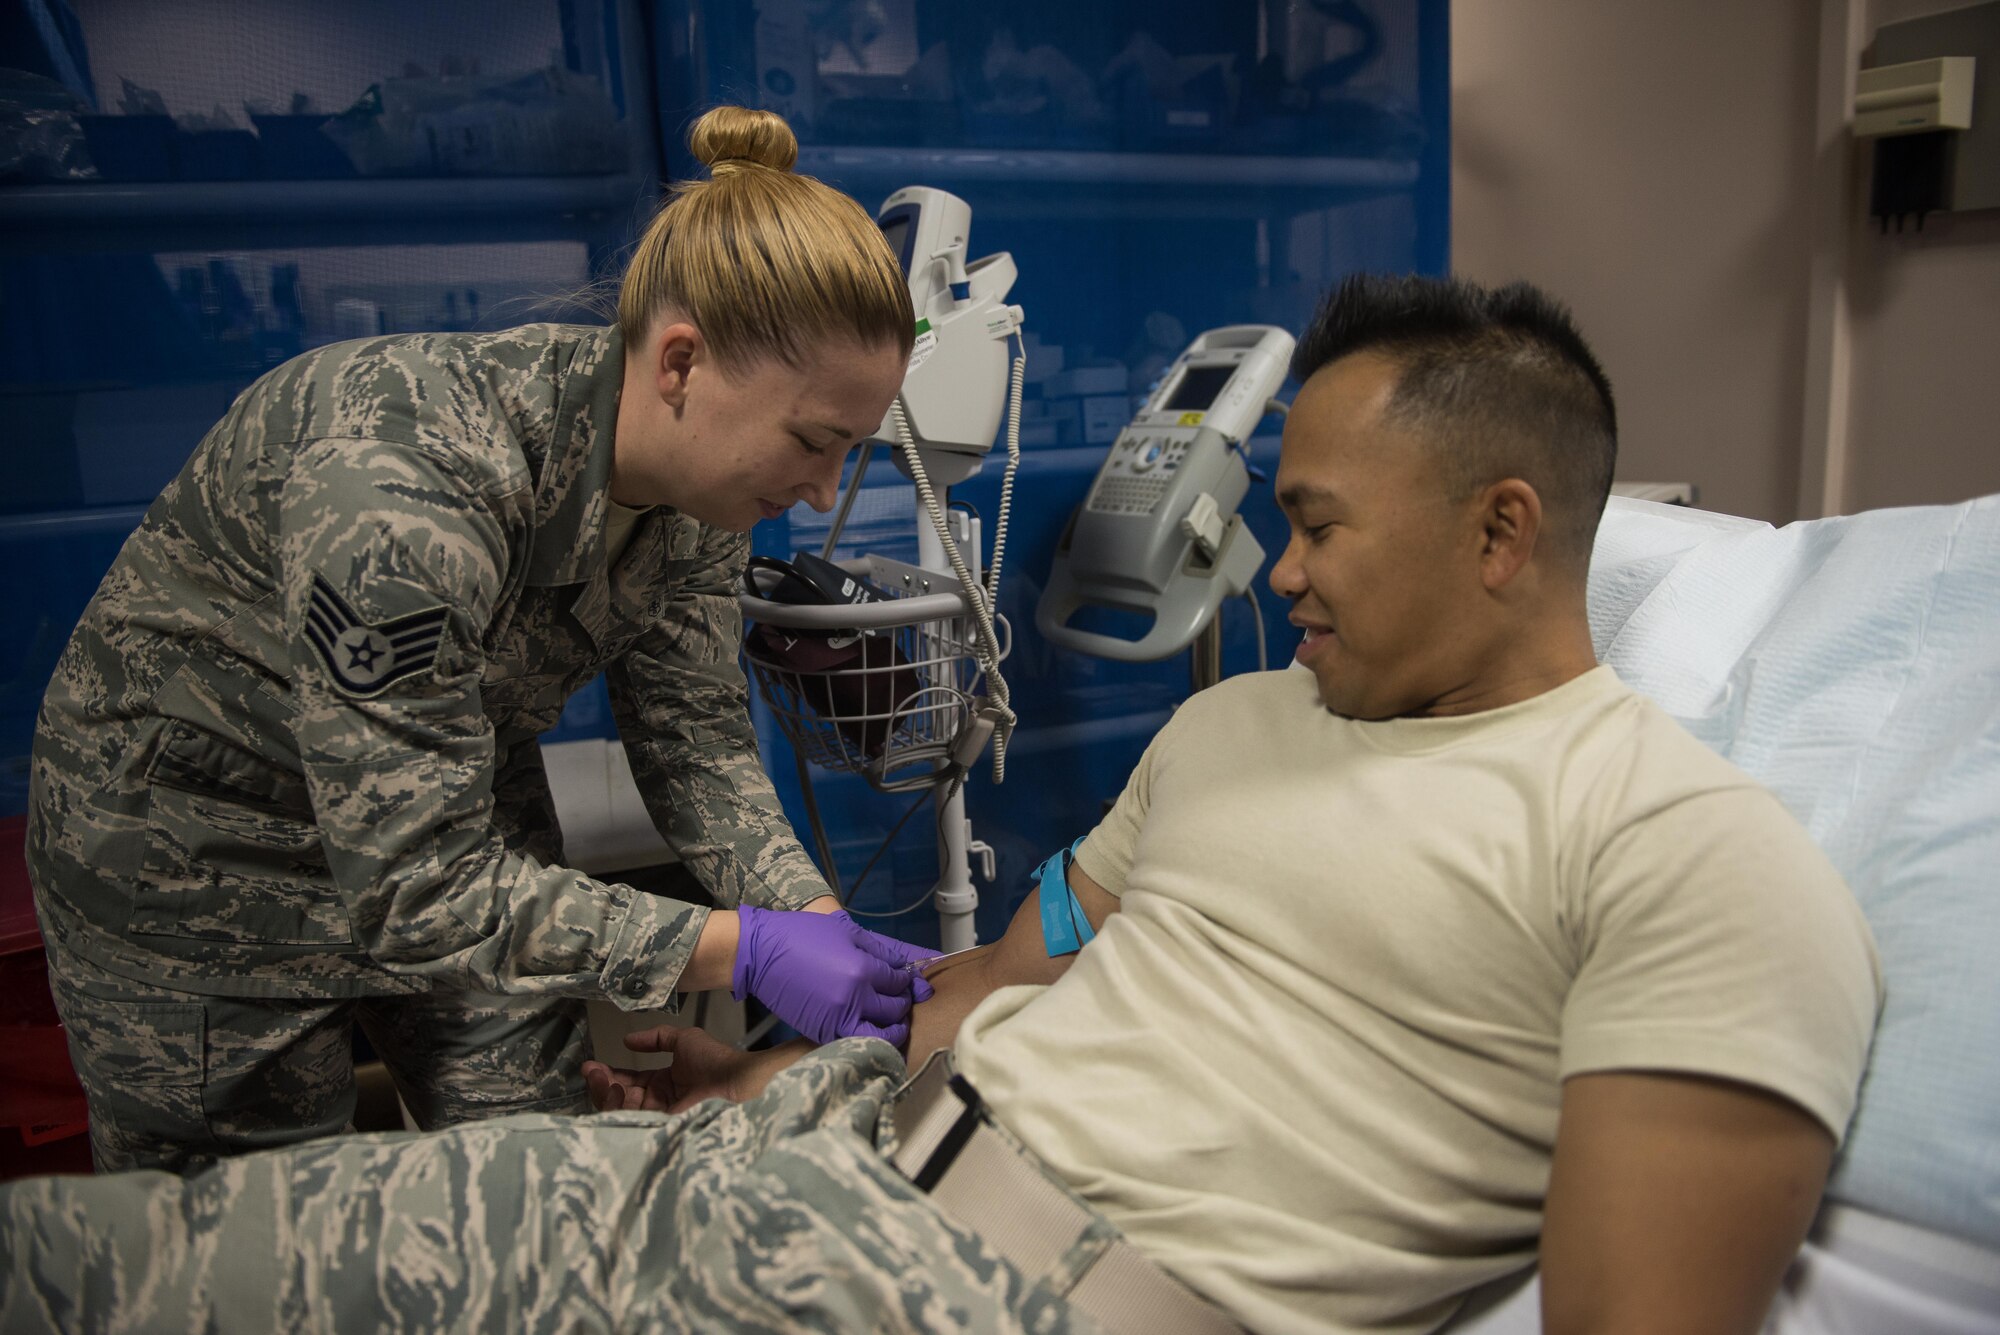 The 386th EMDG’s medical control center is responsible for coordinating nine-line medevacs and aeromedical evacuations to get their patients to a higher level of care.